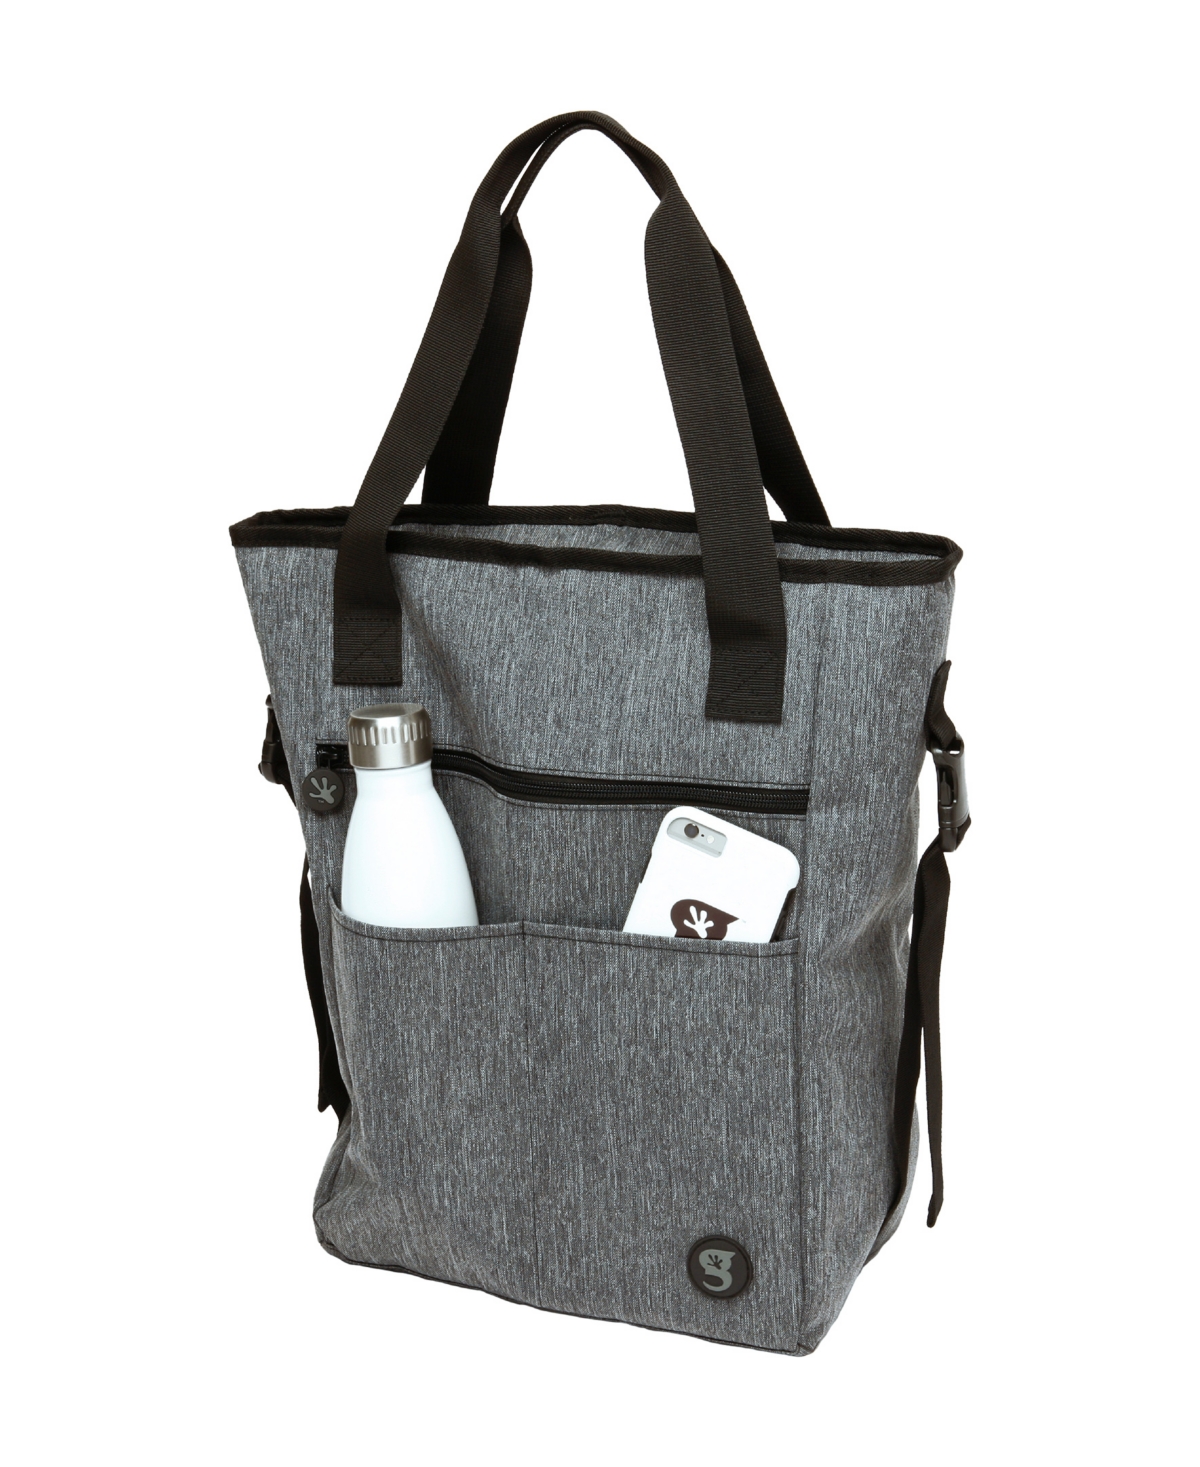 Geckobrands Convertible Tote Backpack In Everyday Gray